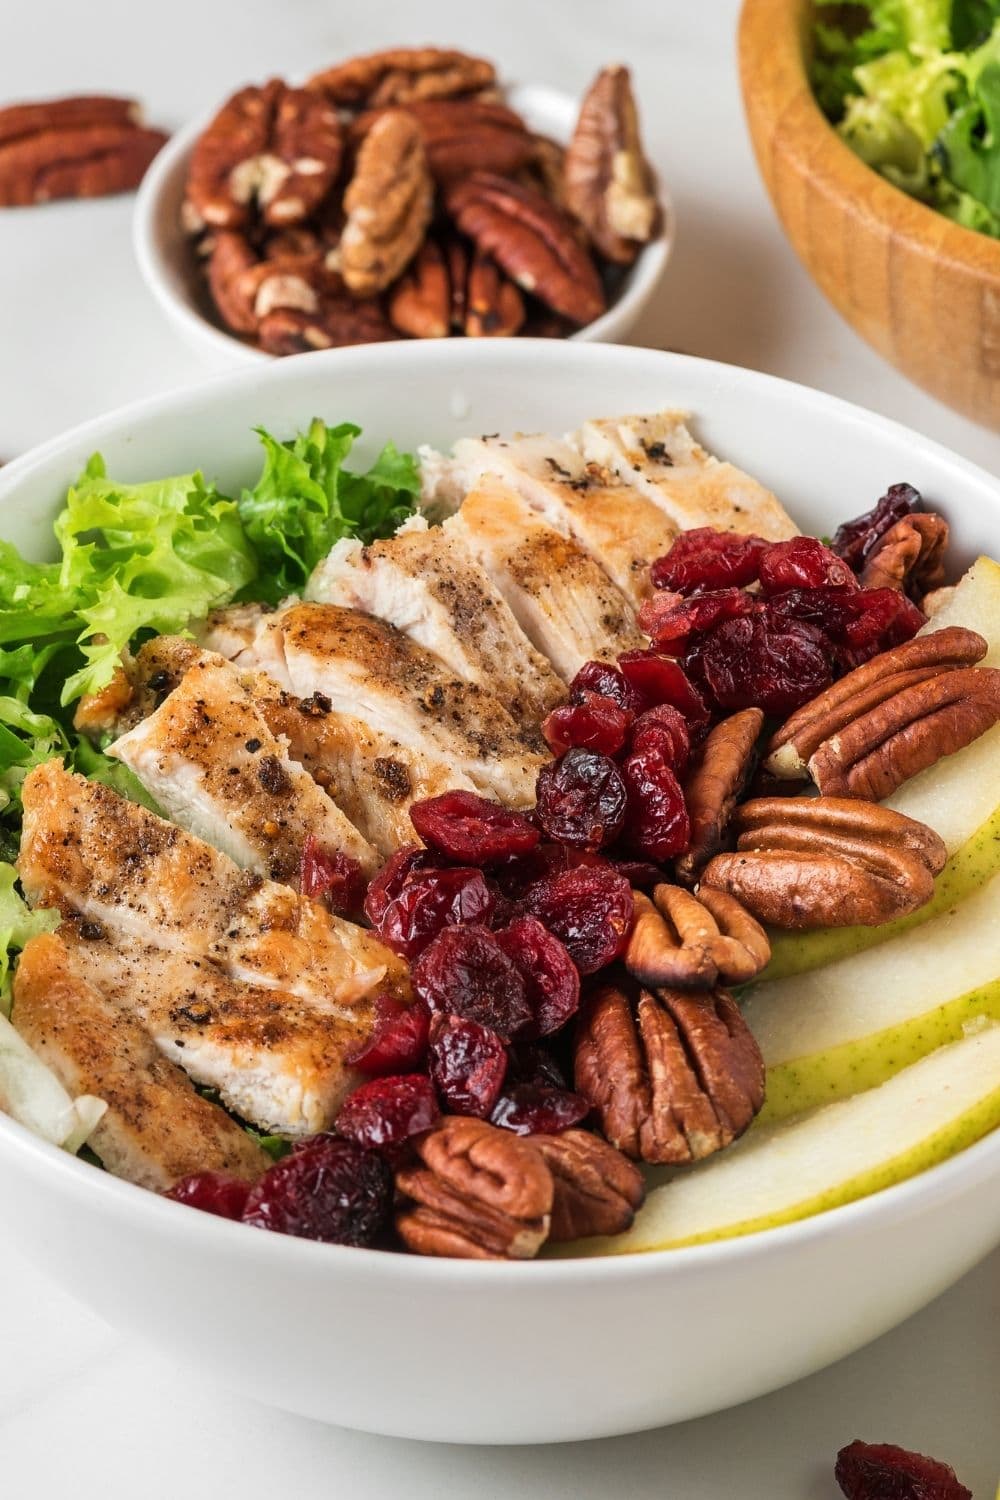 Chicken Salad with Dried Berries, Pecan Nuts and Pears